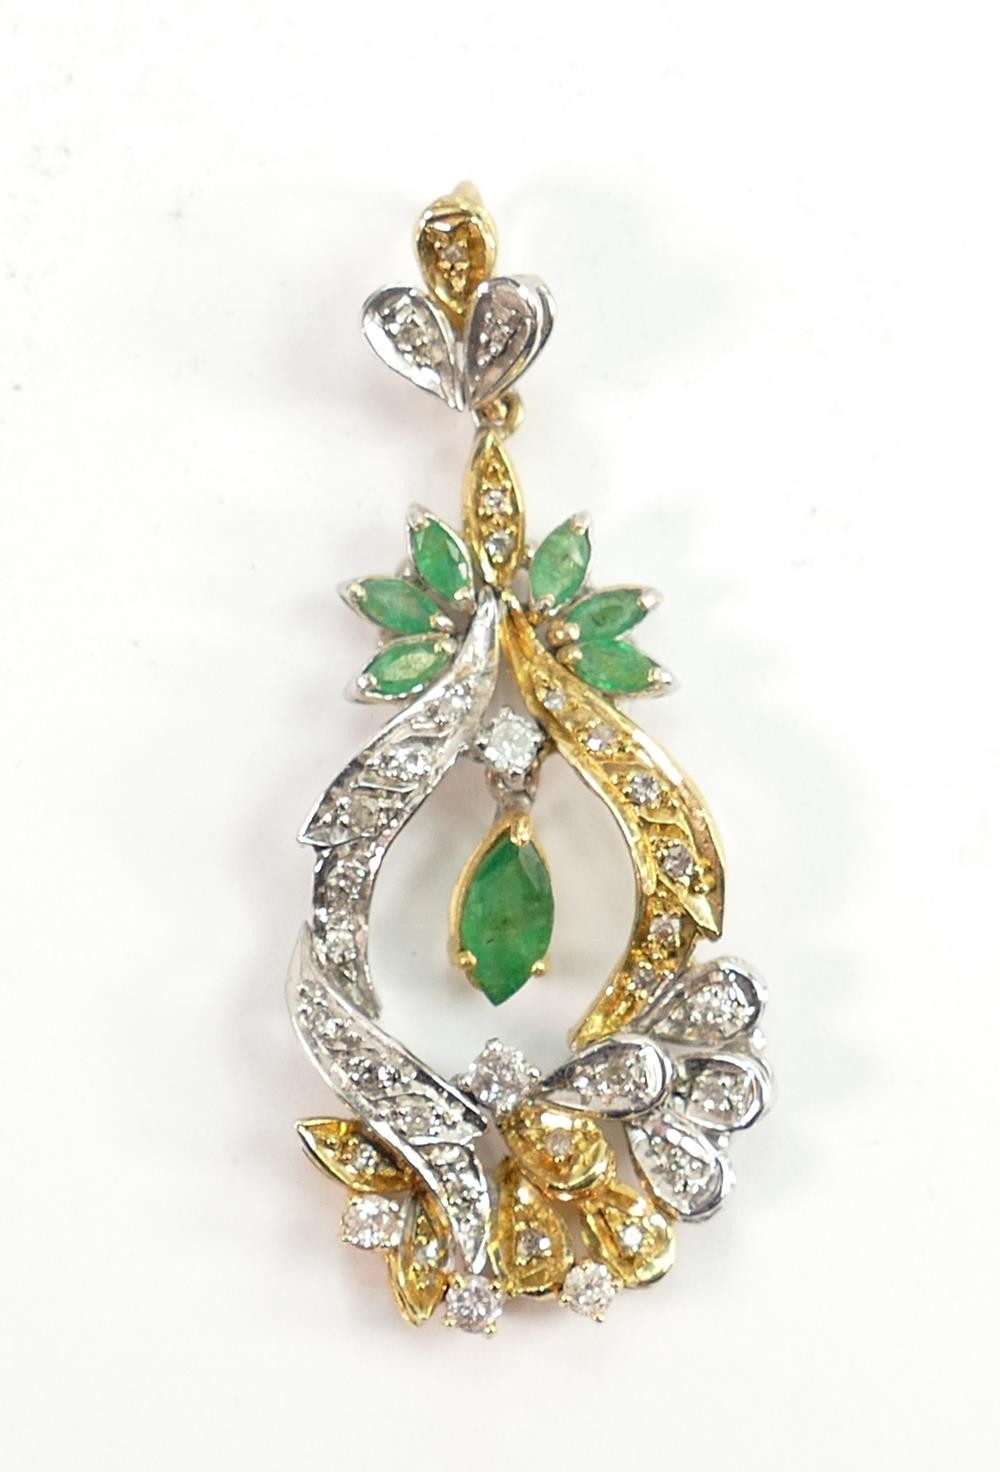 18ct gold diamond and emerald large pendant: Weight 9.2g, and measuring 55mm high. A very impressive - Image 2 of 2